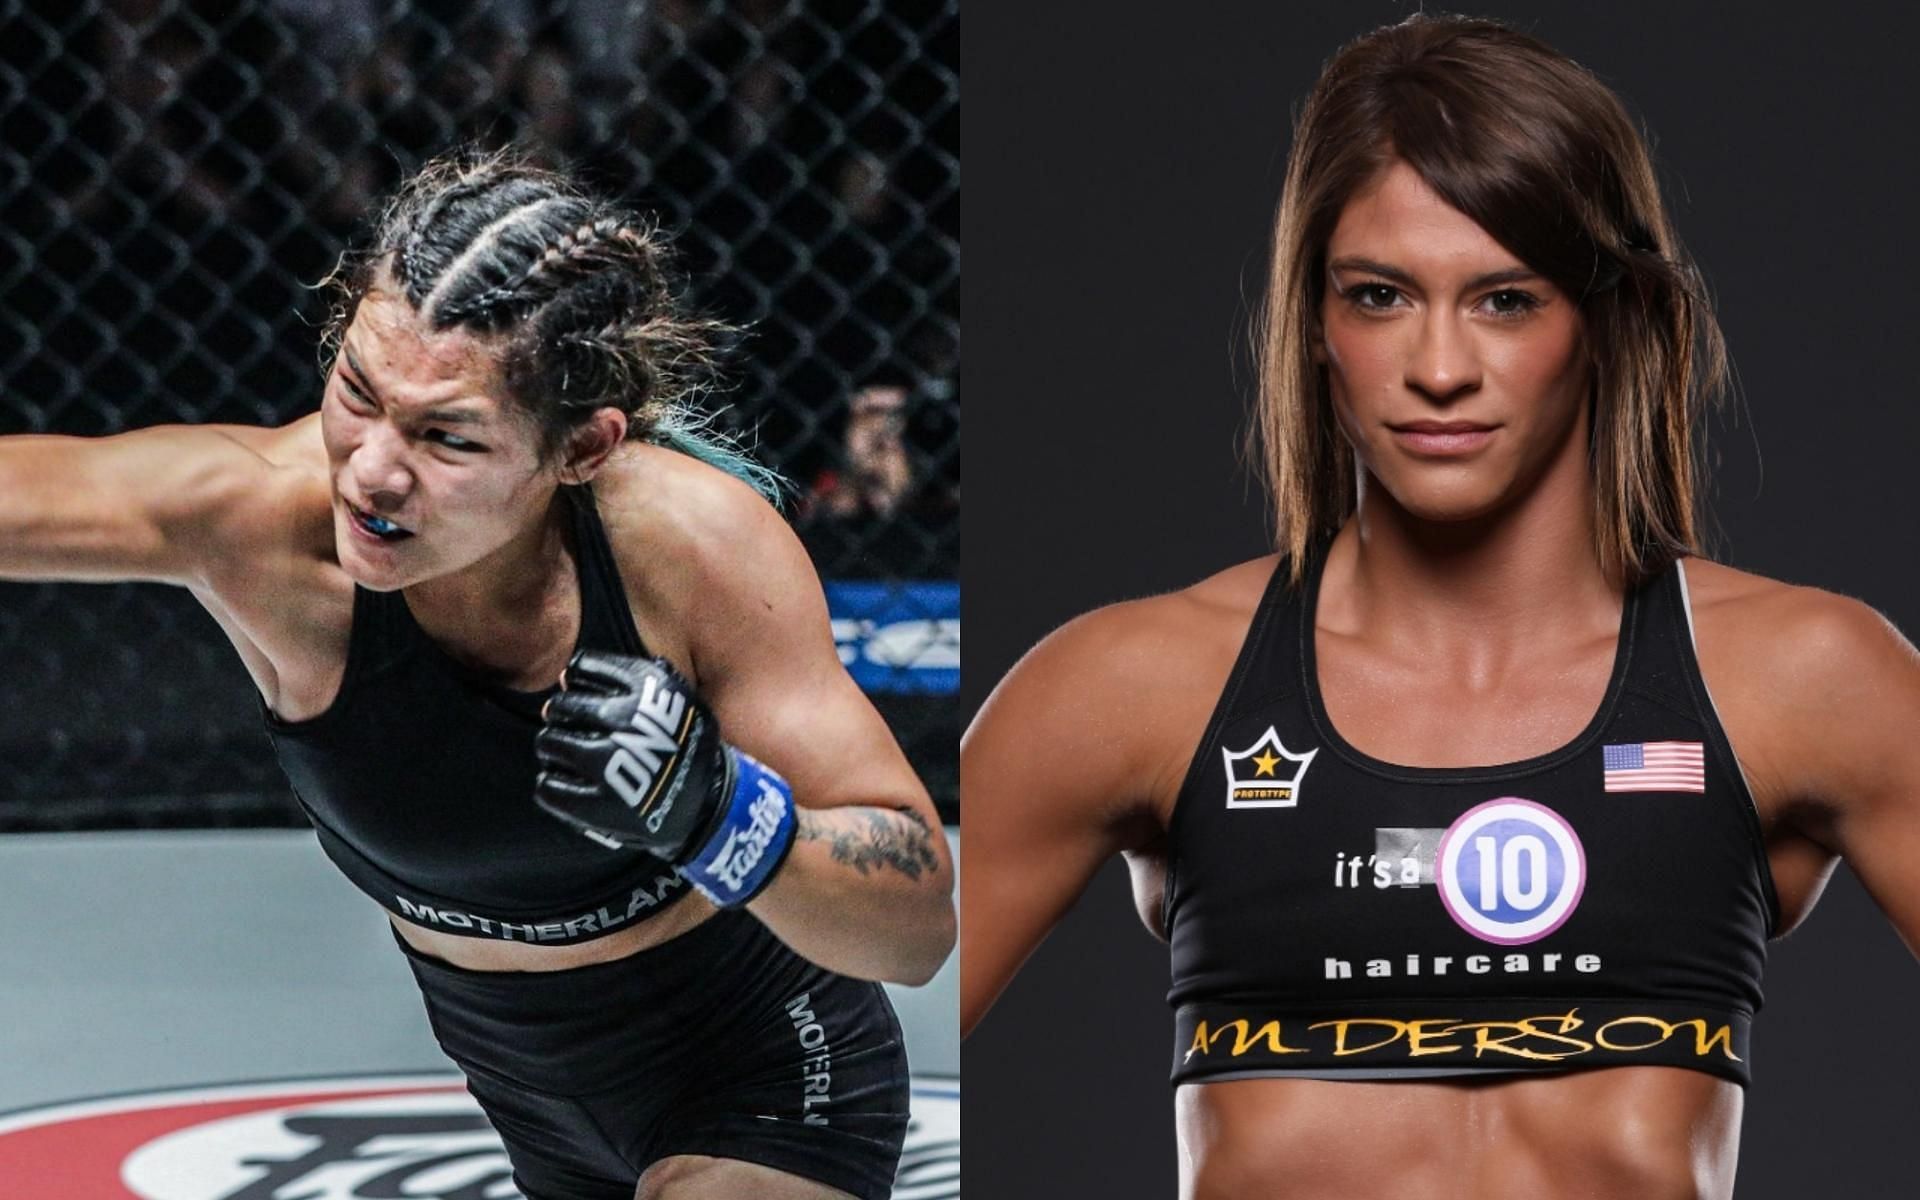 Asha Roka (left) and Alyse Anderson (right) will face each other in an atomweight bout at ONE: X. (Images courtesy of ONE Championship)